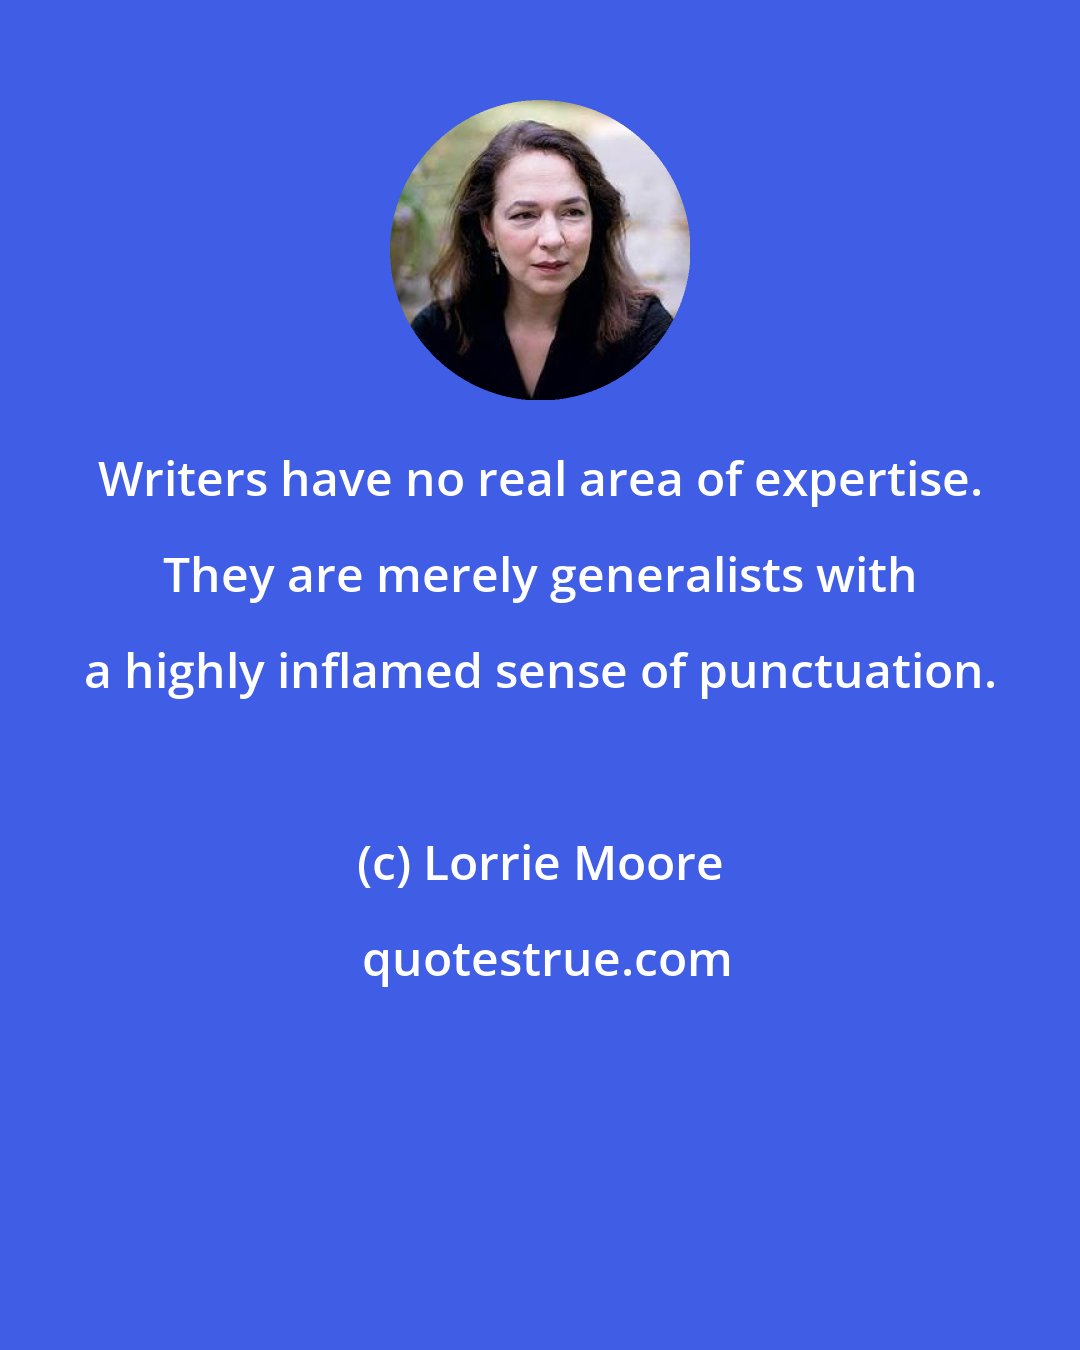 Lorrie Moore: Writers have no real area of expertise. They are merely generalists with a highly inflamed sense of punctuation.